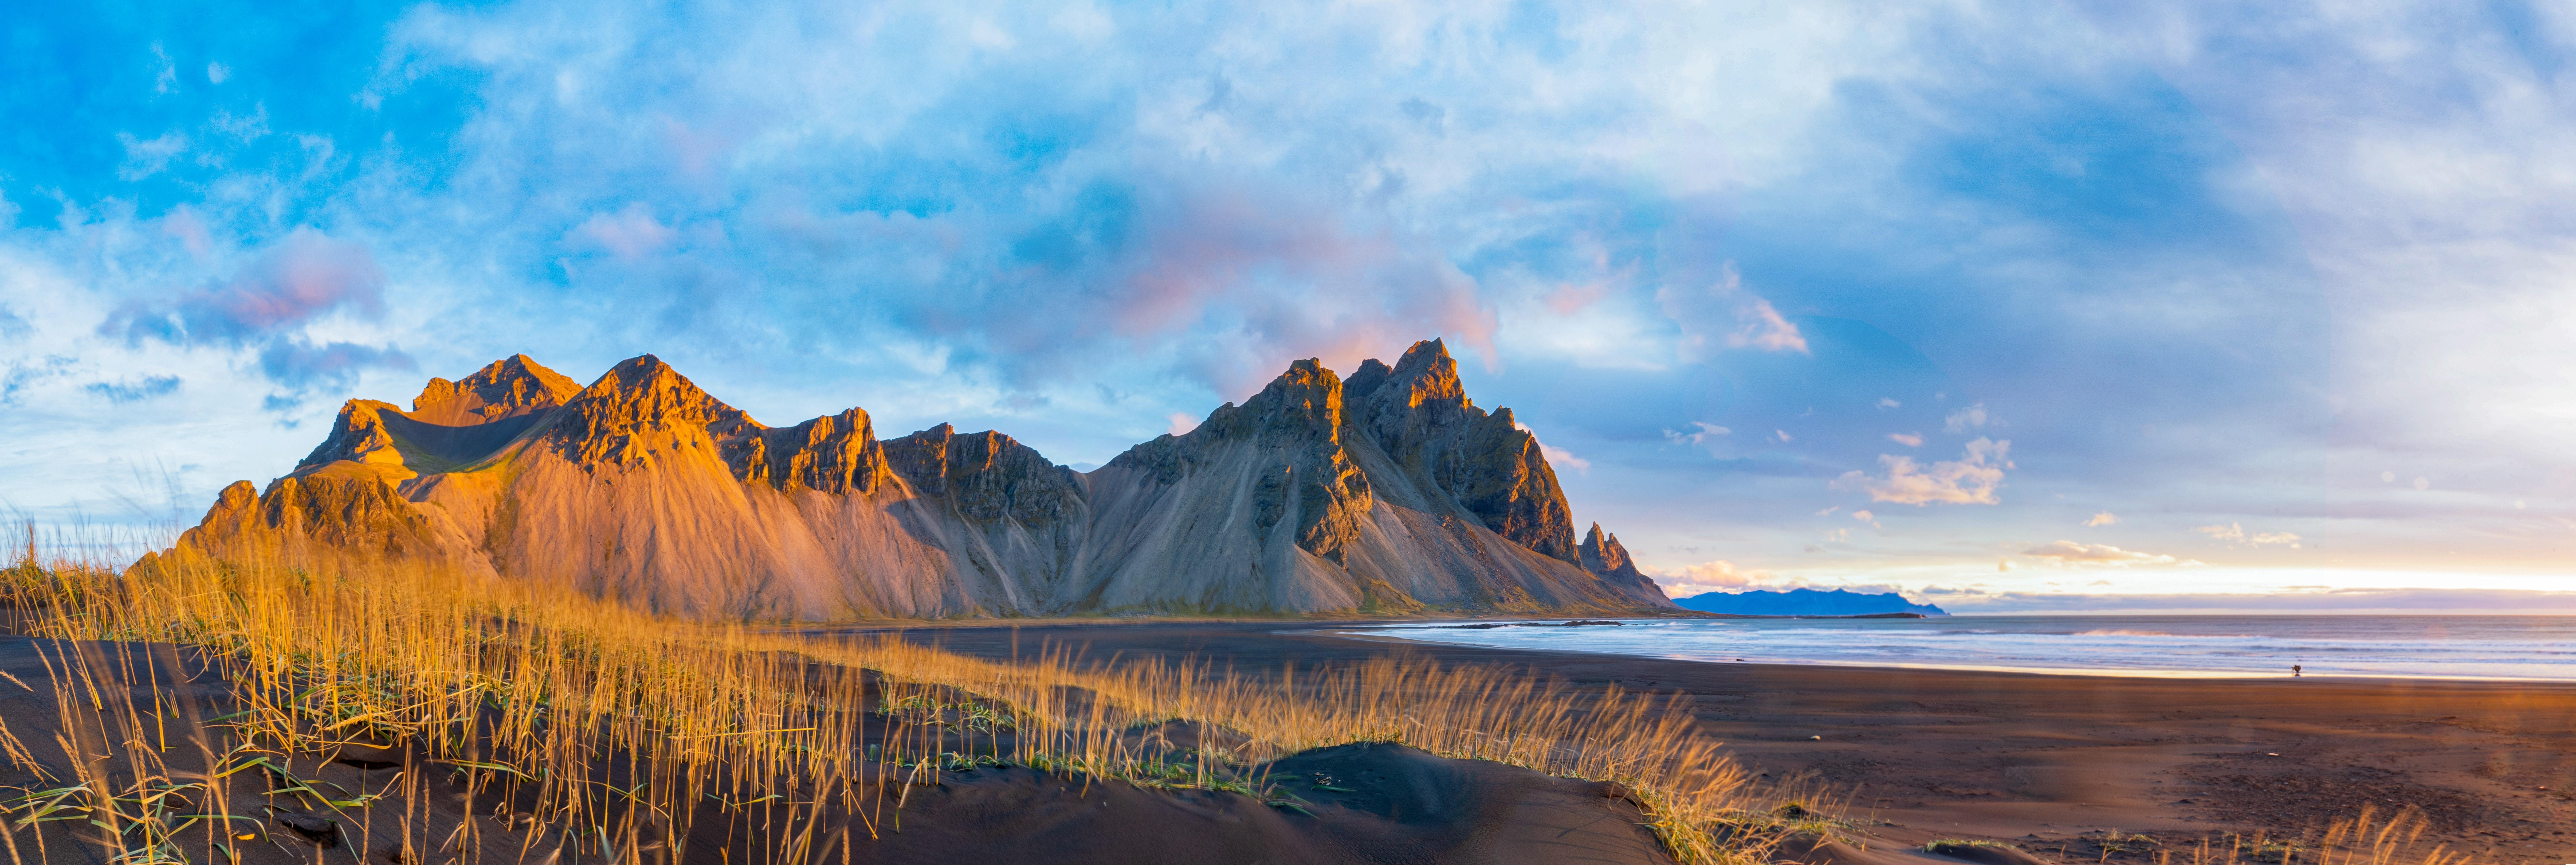 140 4K Iceland Wallpapers Background Images